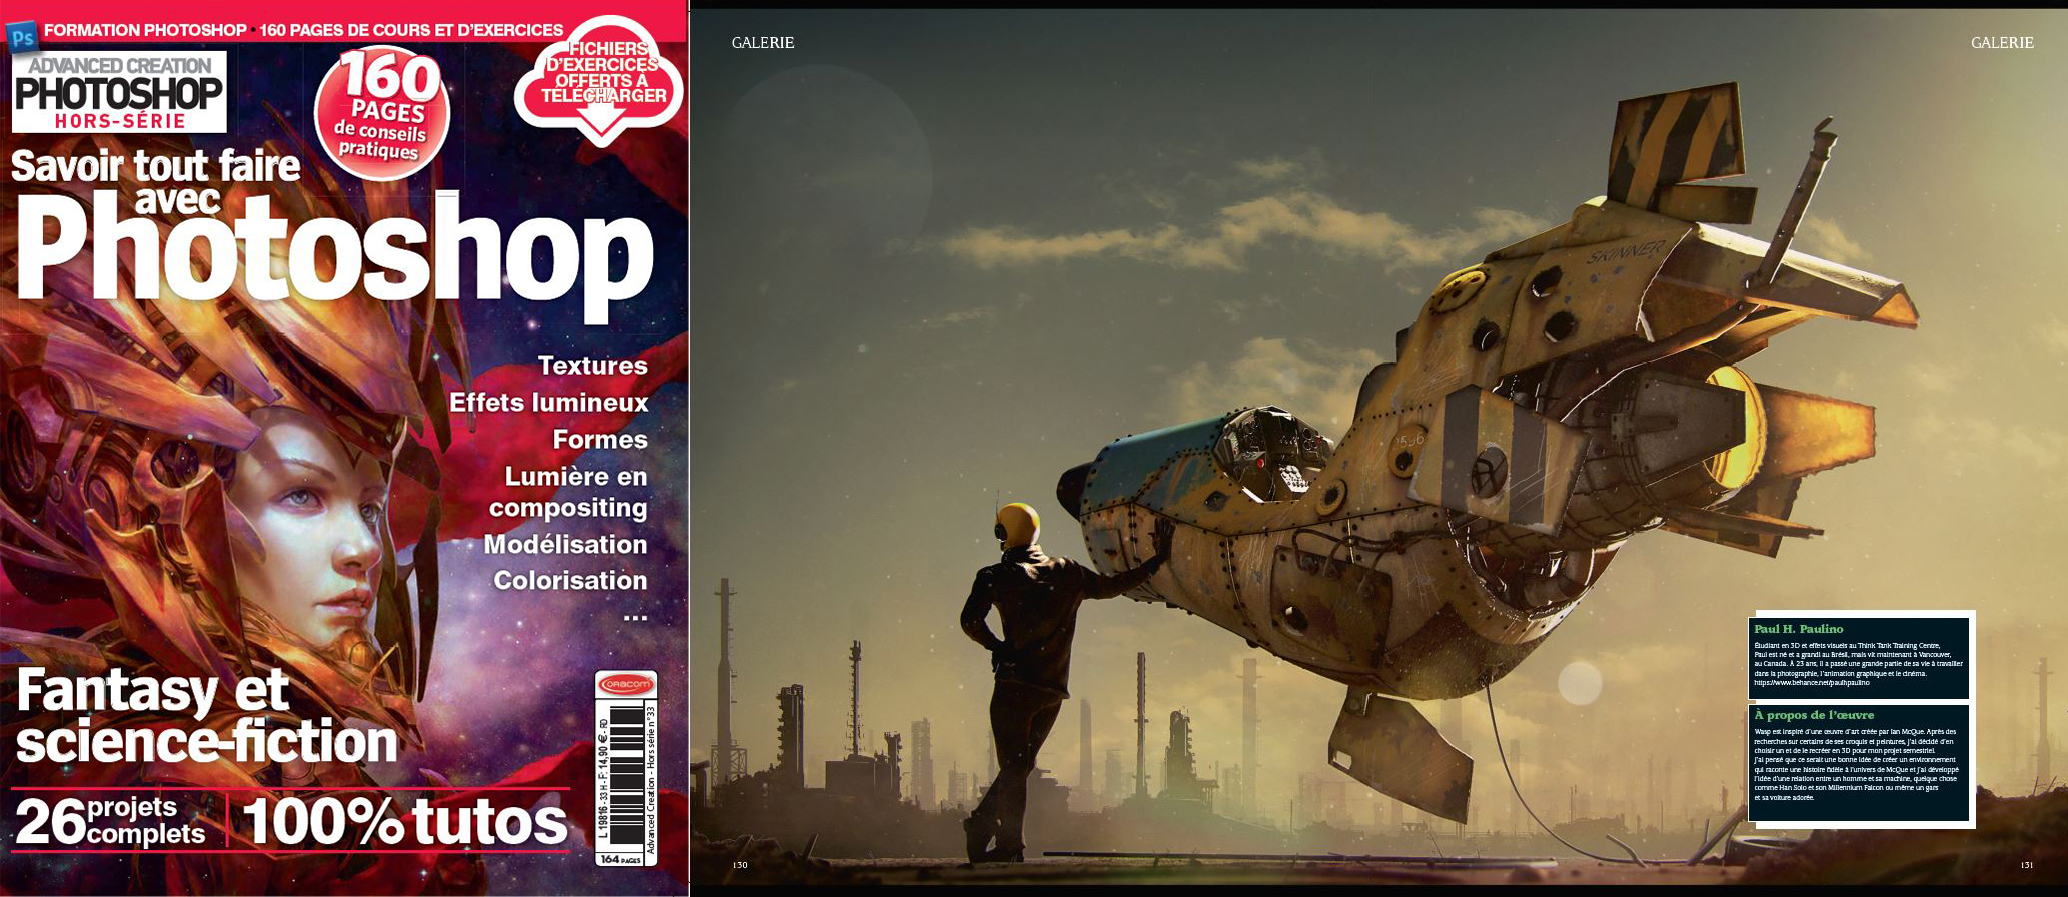 Wasp_PhotoshopCreativeMAG_WithCover.jpg